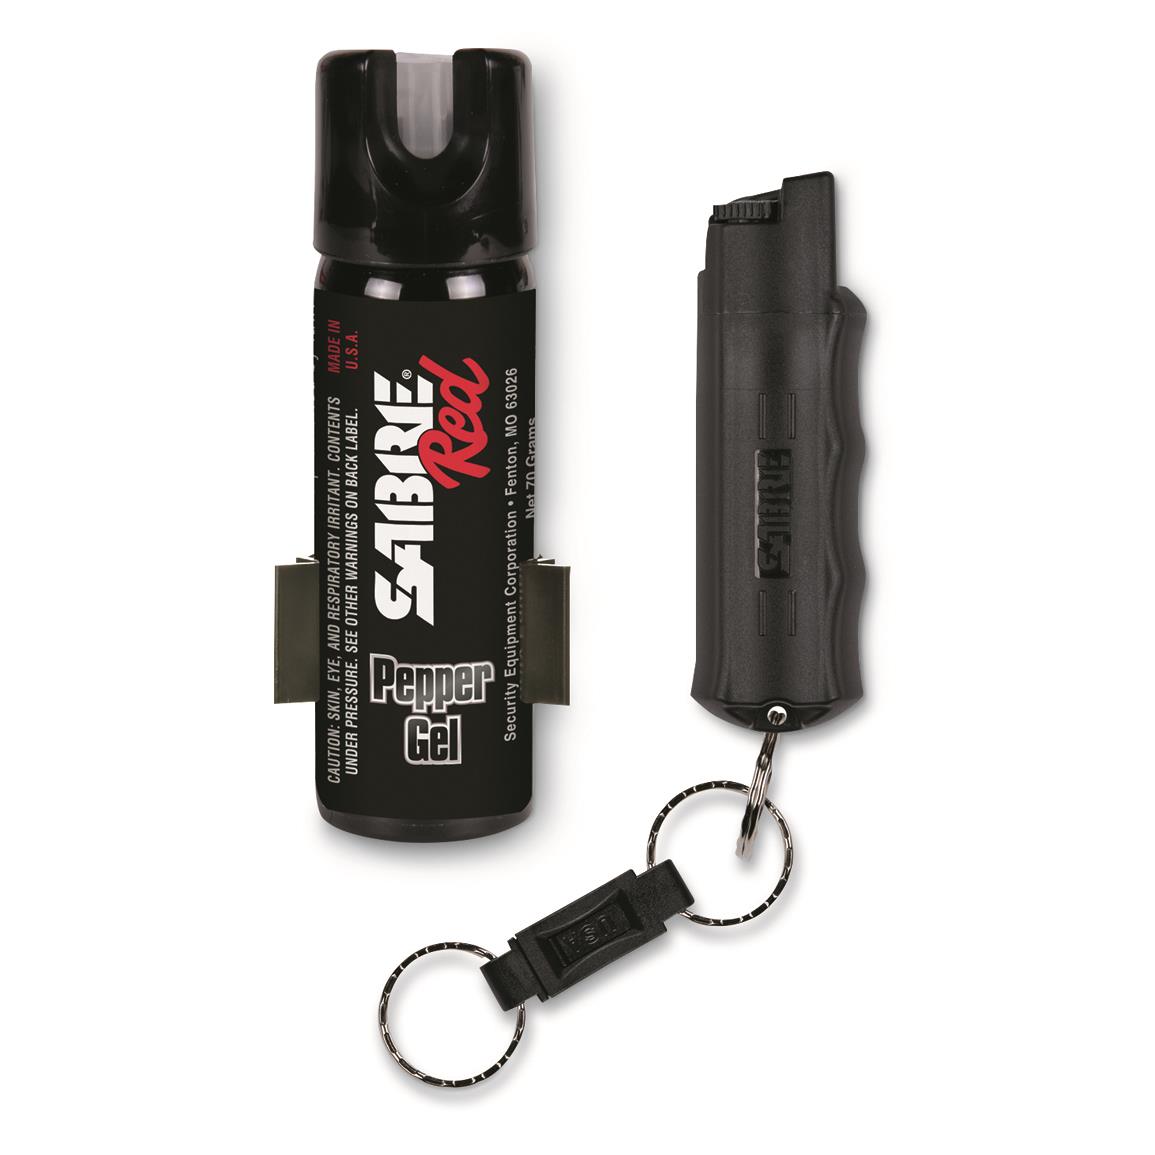 Sabre Red 3-in-1 Pepper Spray Home and Away Protection Kit